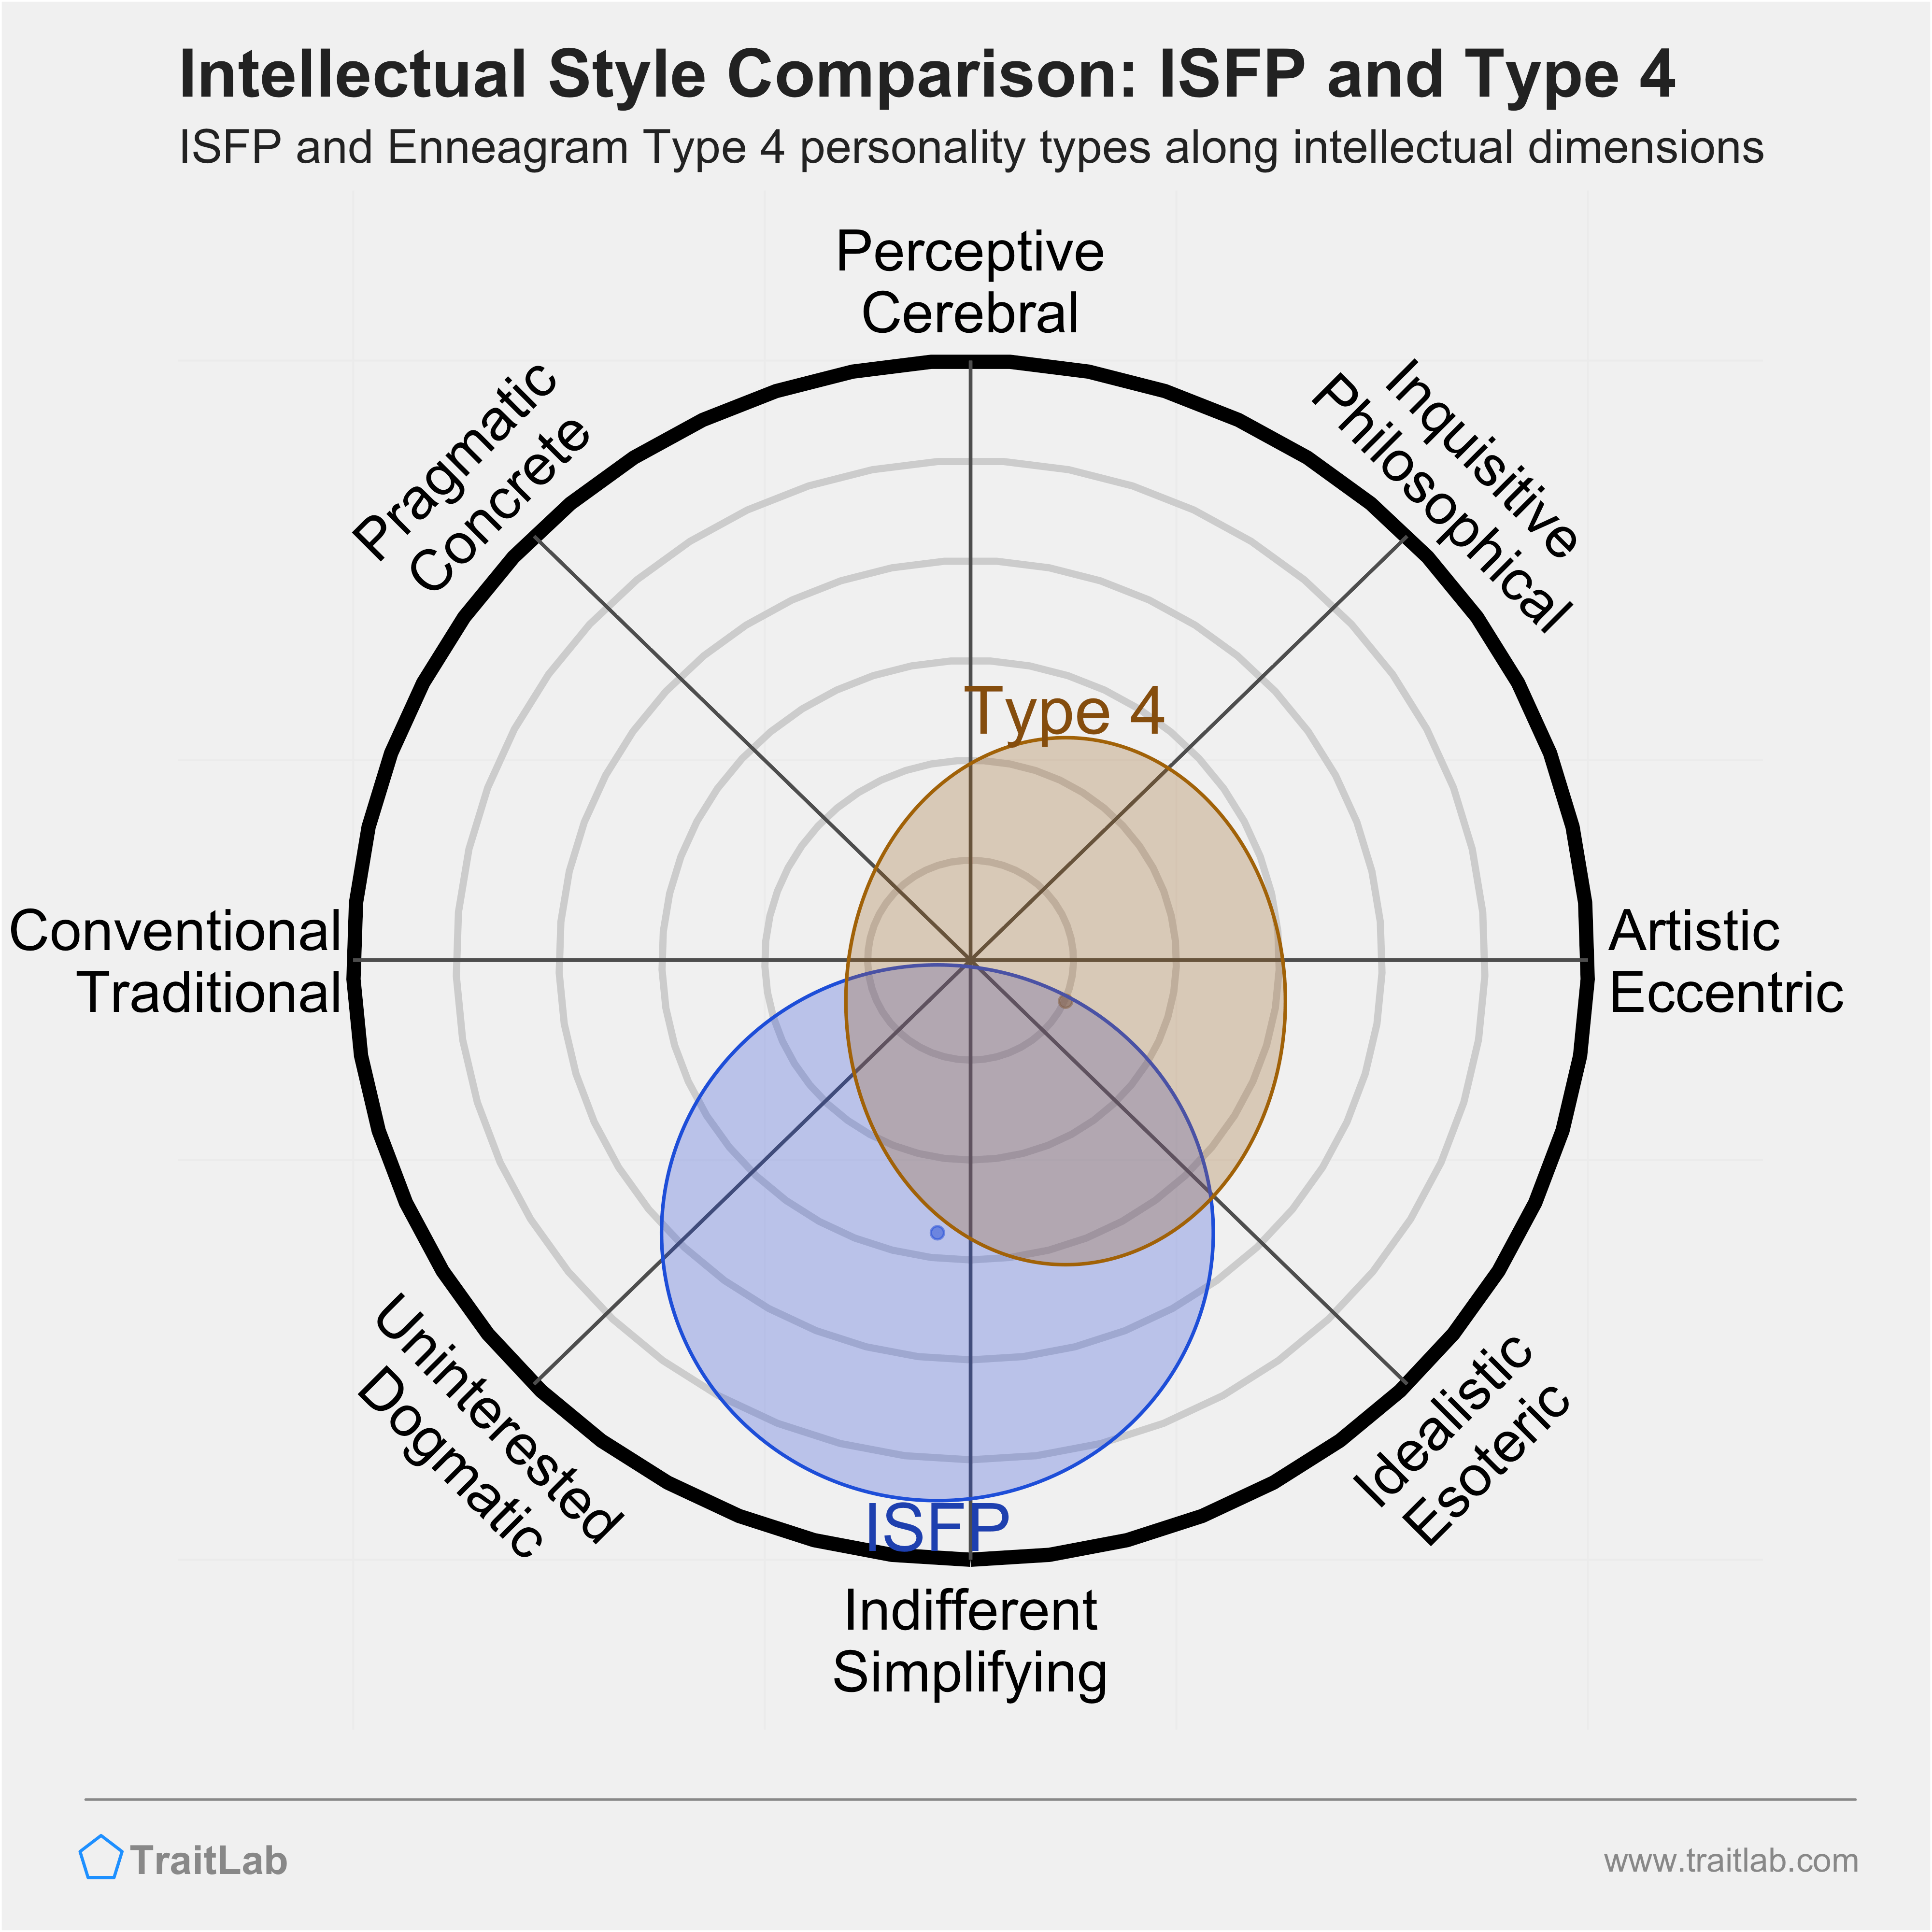 ISFP and Type 4 comparison across intellectual dimensions